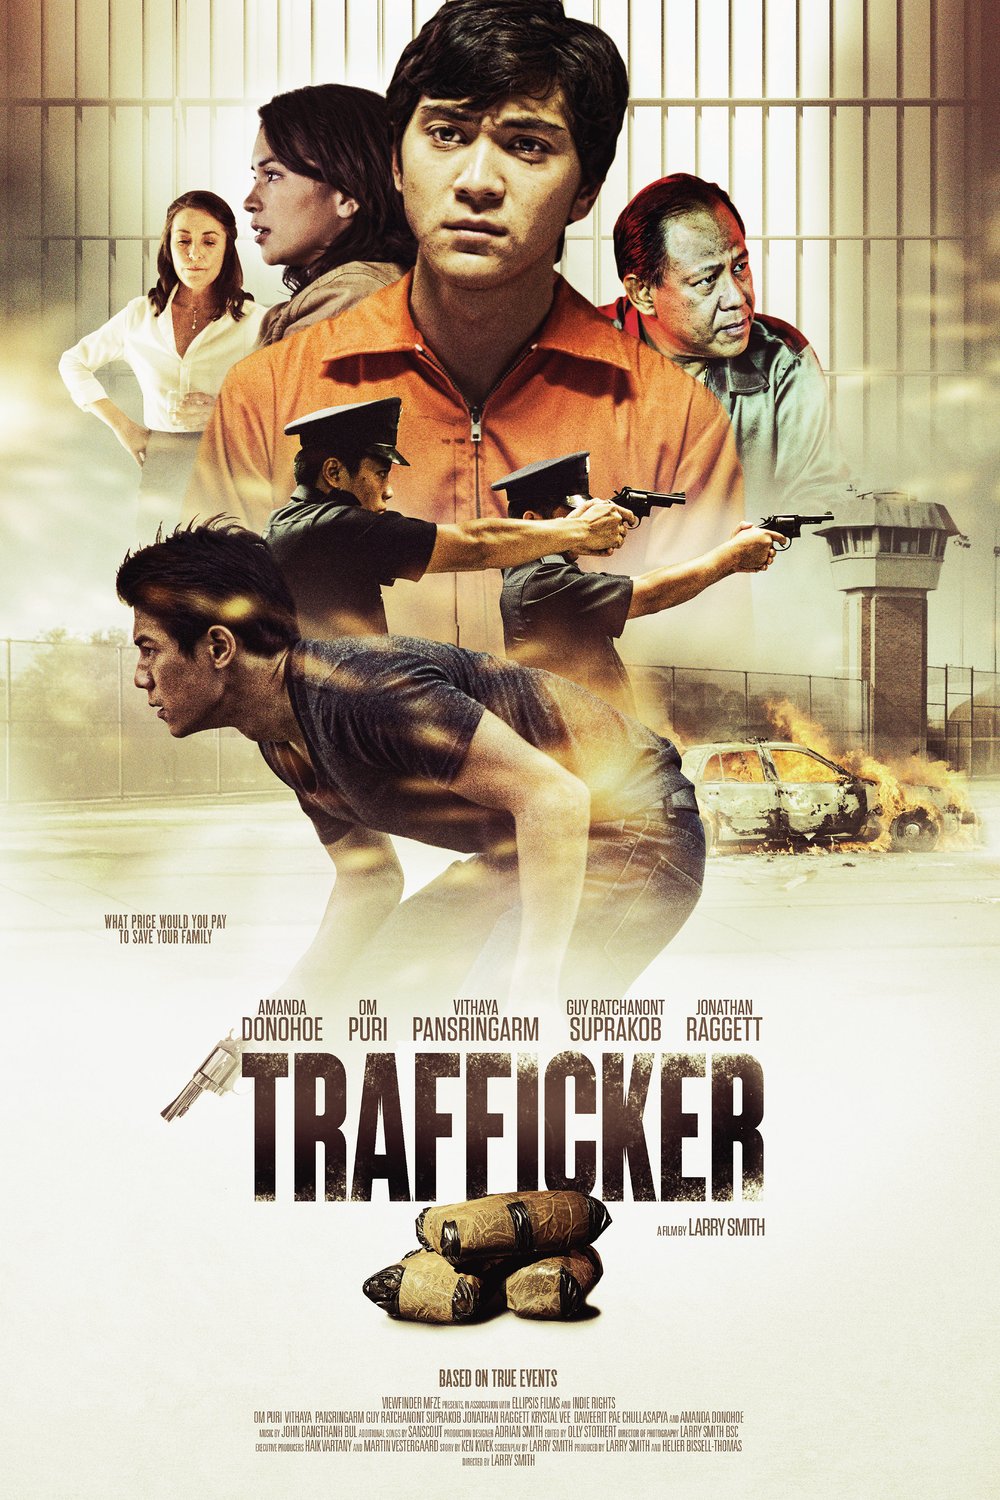 Poster of the movie Trafficker